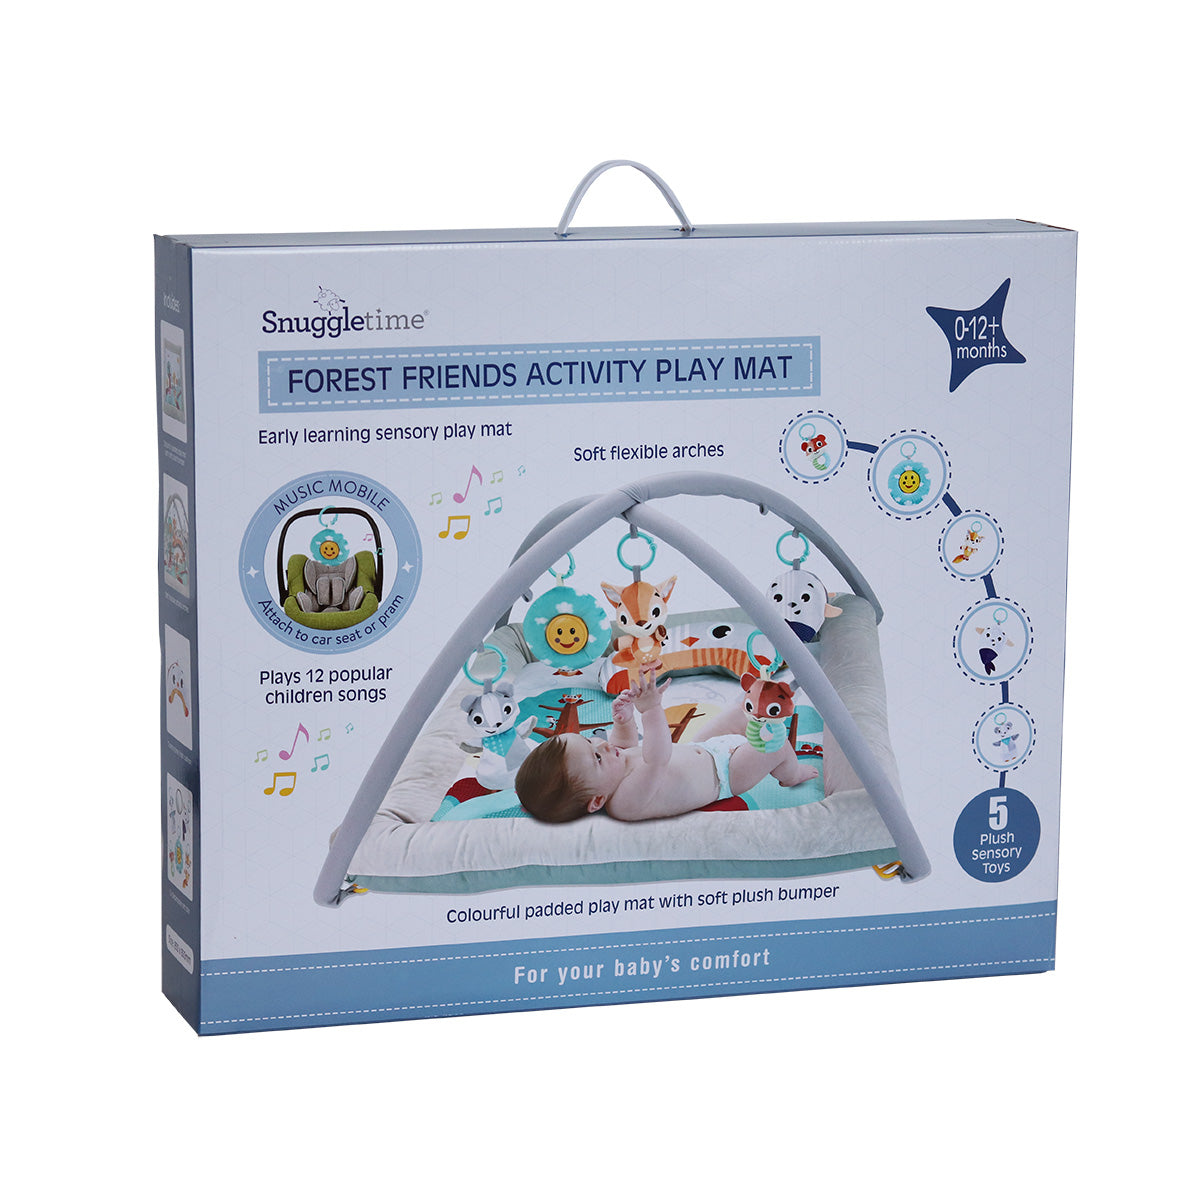 Snuggletime Forest Friends Activity Play Mat